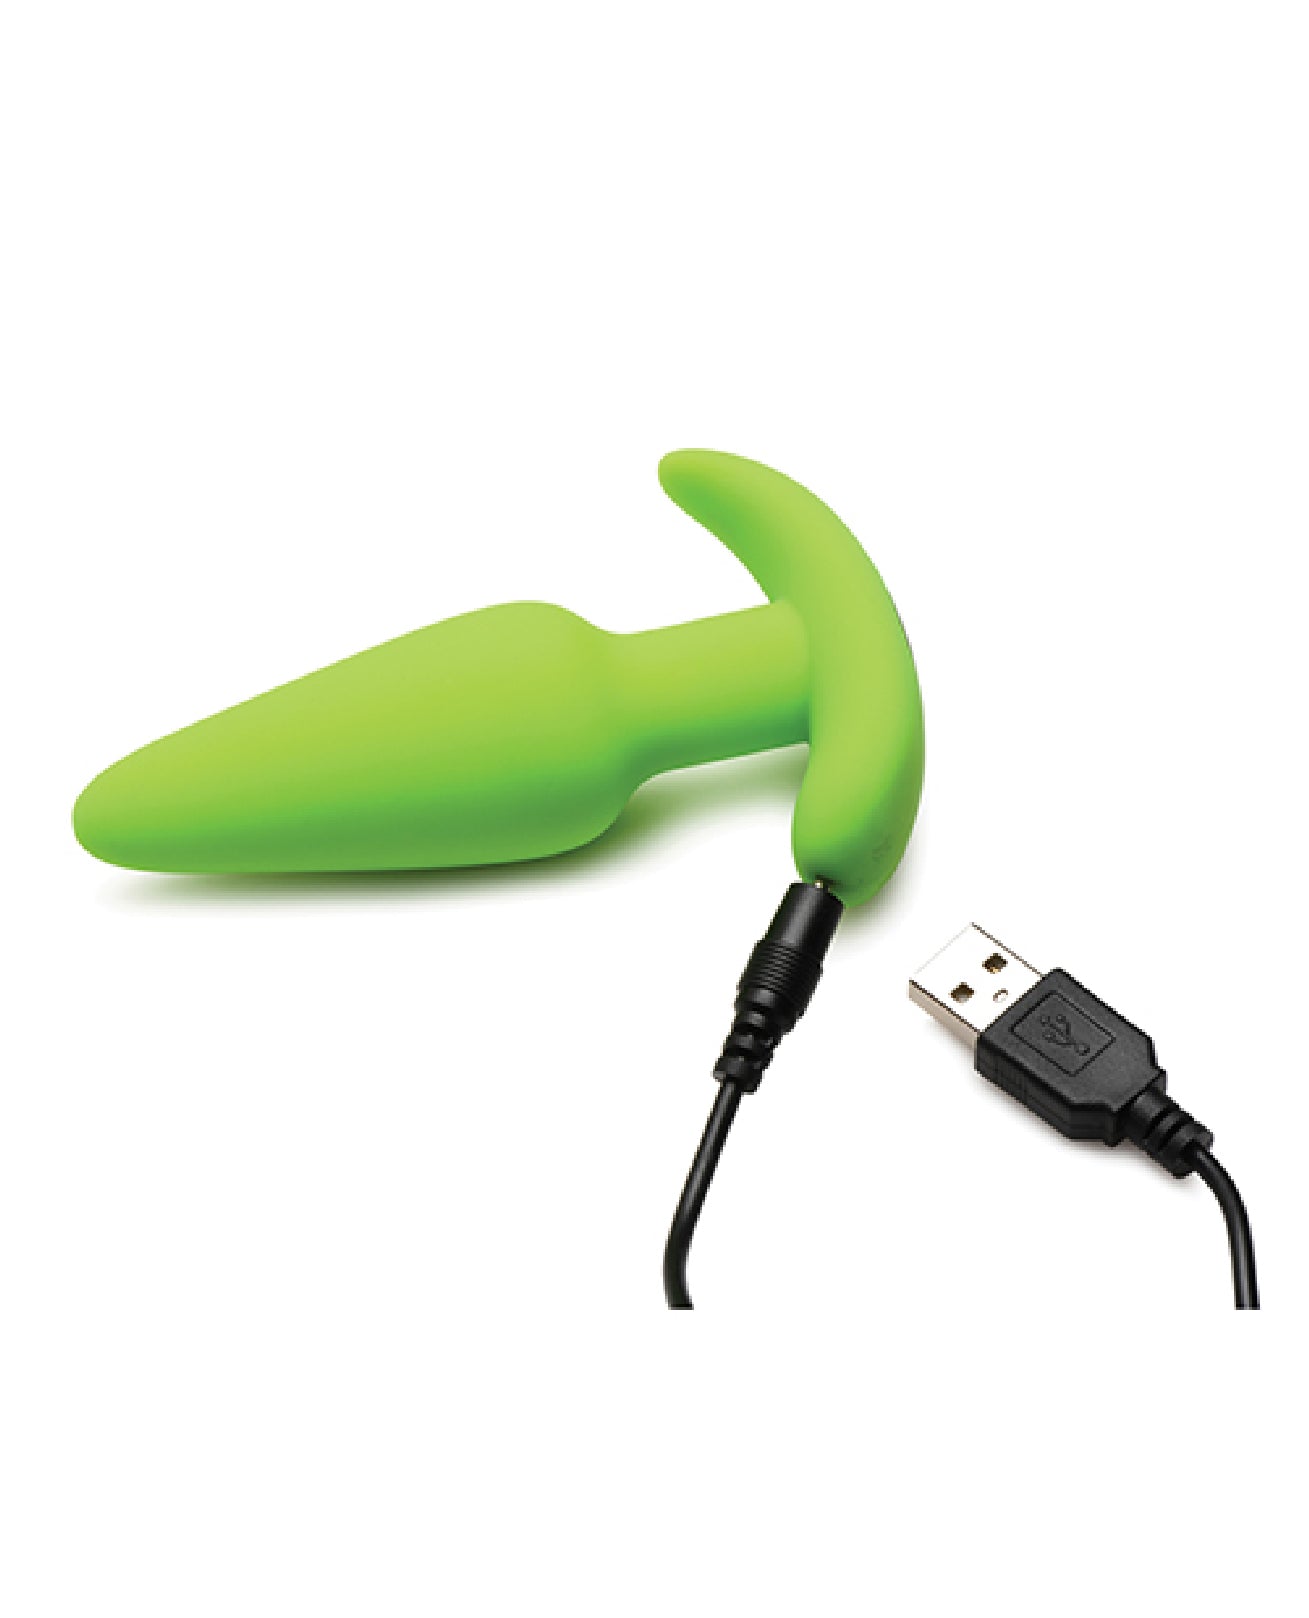 Glow in the Dark Butt Plug With Remote - Green-1